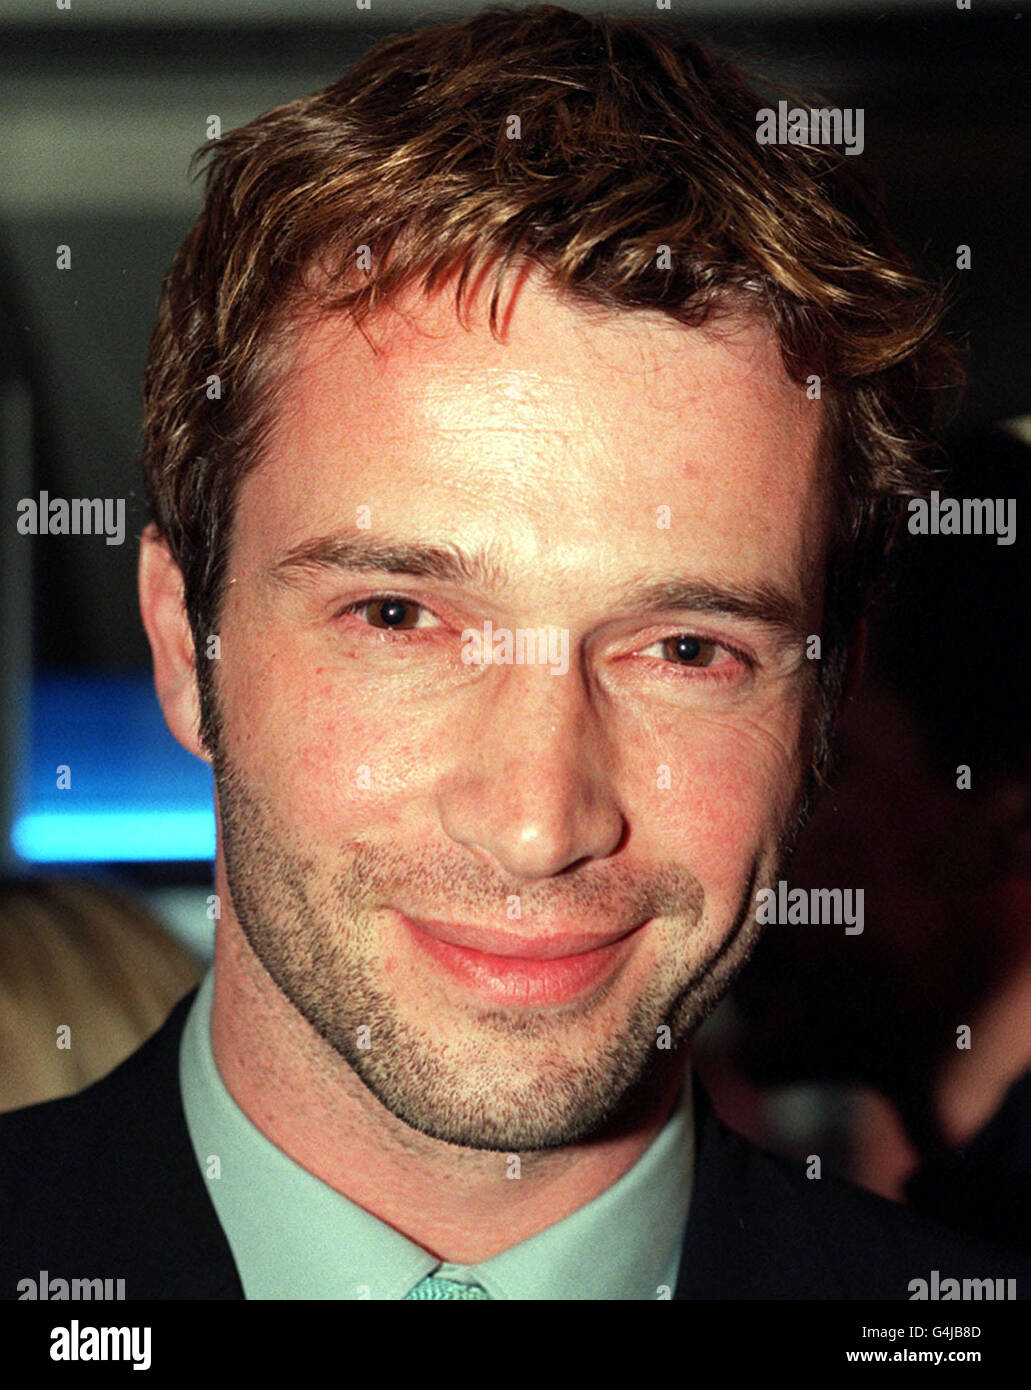 Actor James Purefoy at the Gala Charity Premiere of his film 'Bedrooms & Hallways,' at the Curzon Soho Cinema, London, in aid of The Elton John Aids Foundation and Fashion Acts. Stock Photo